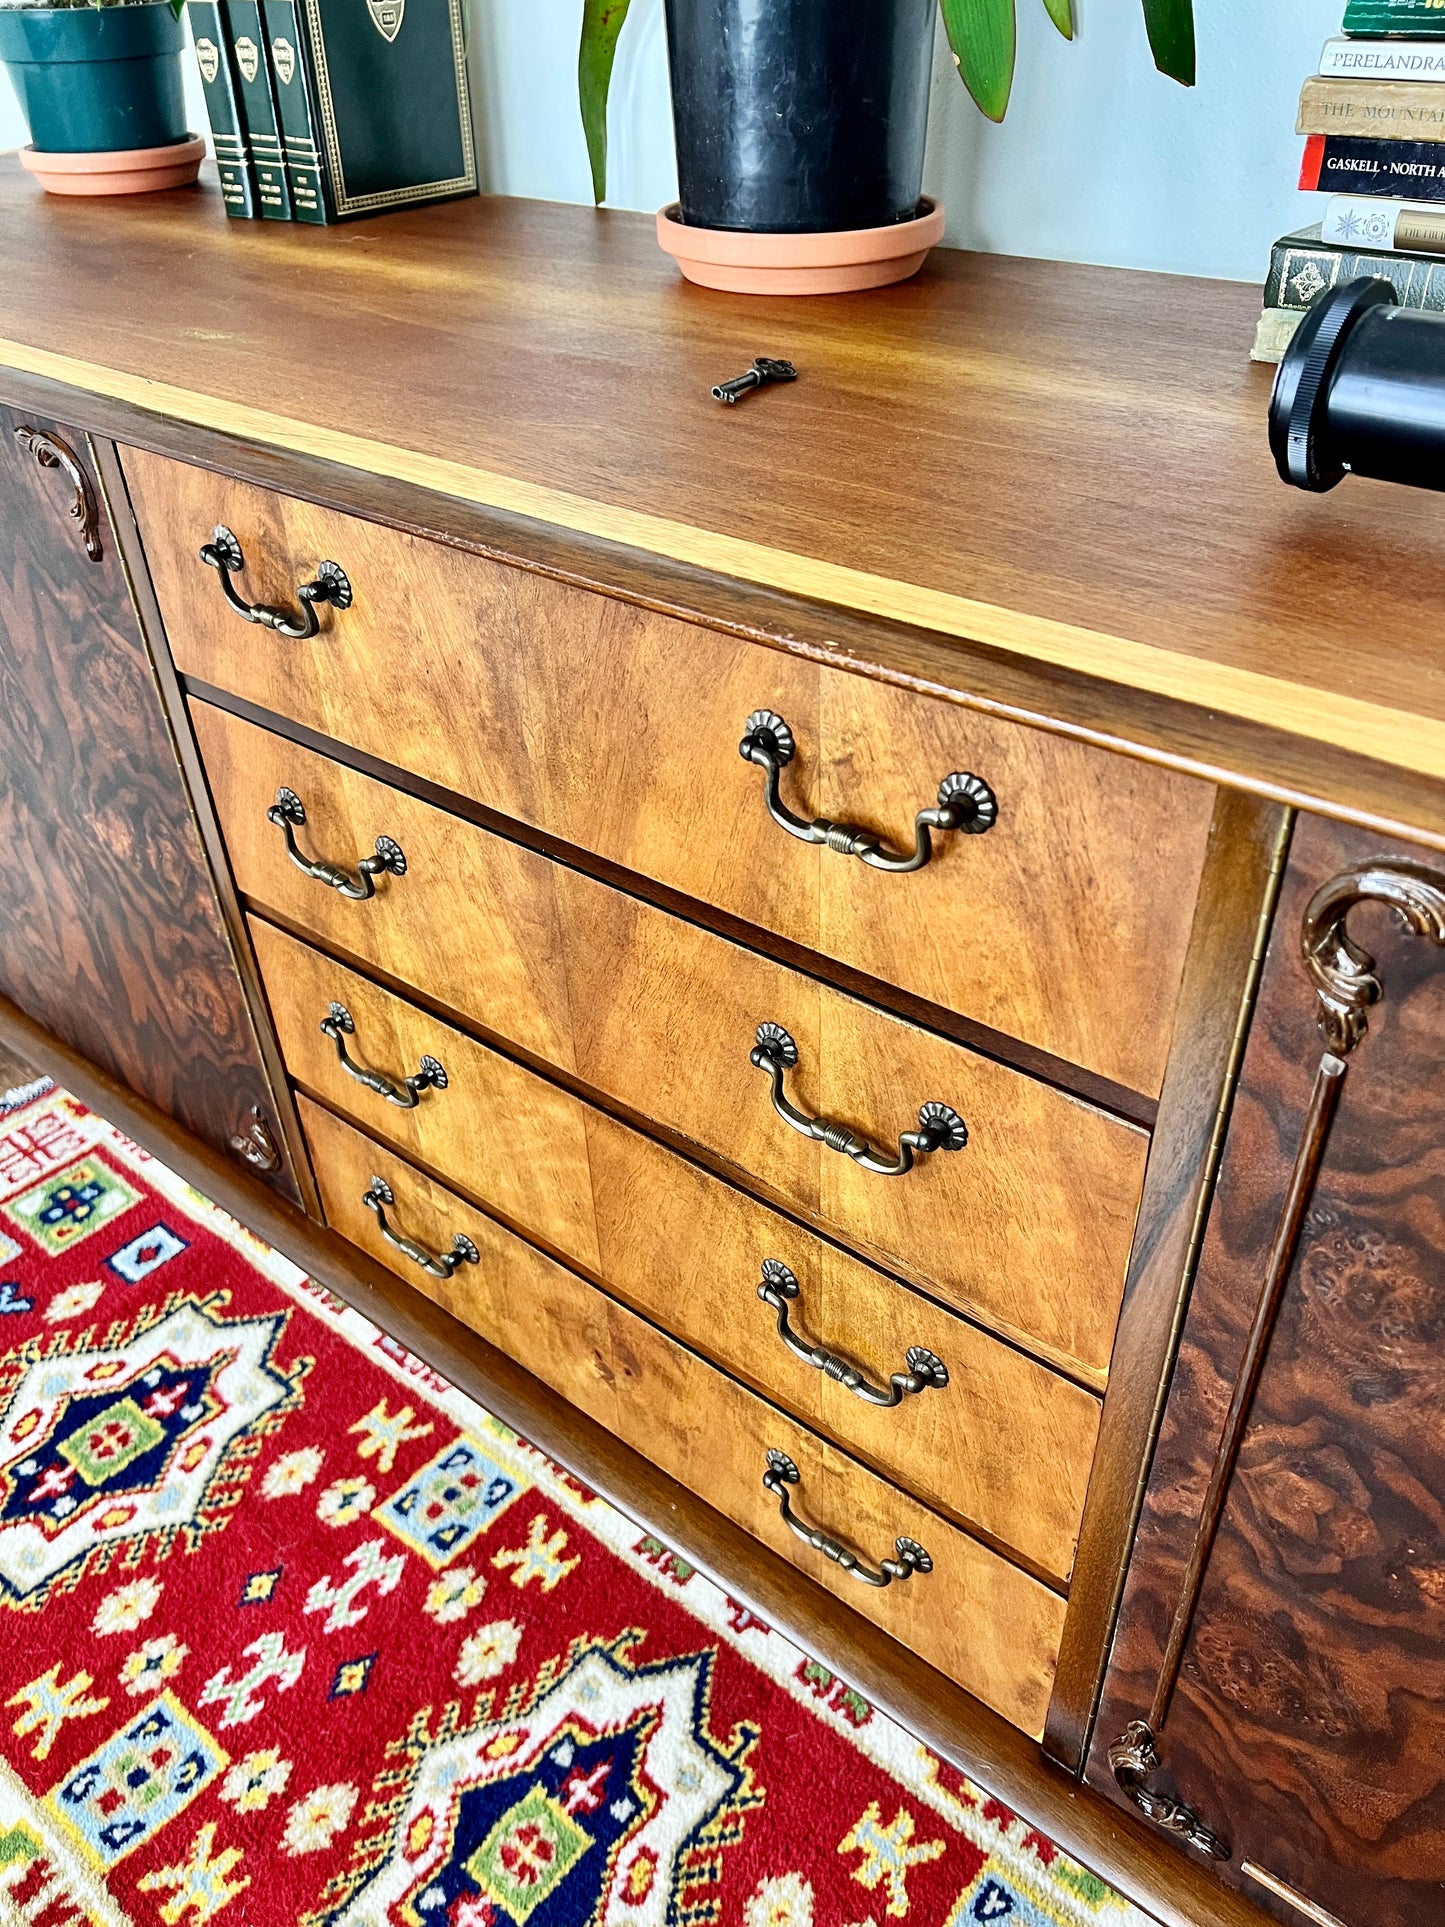 The Rorschach Sideboard